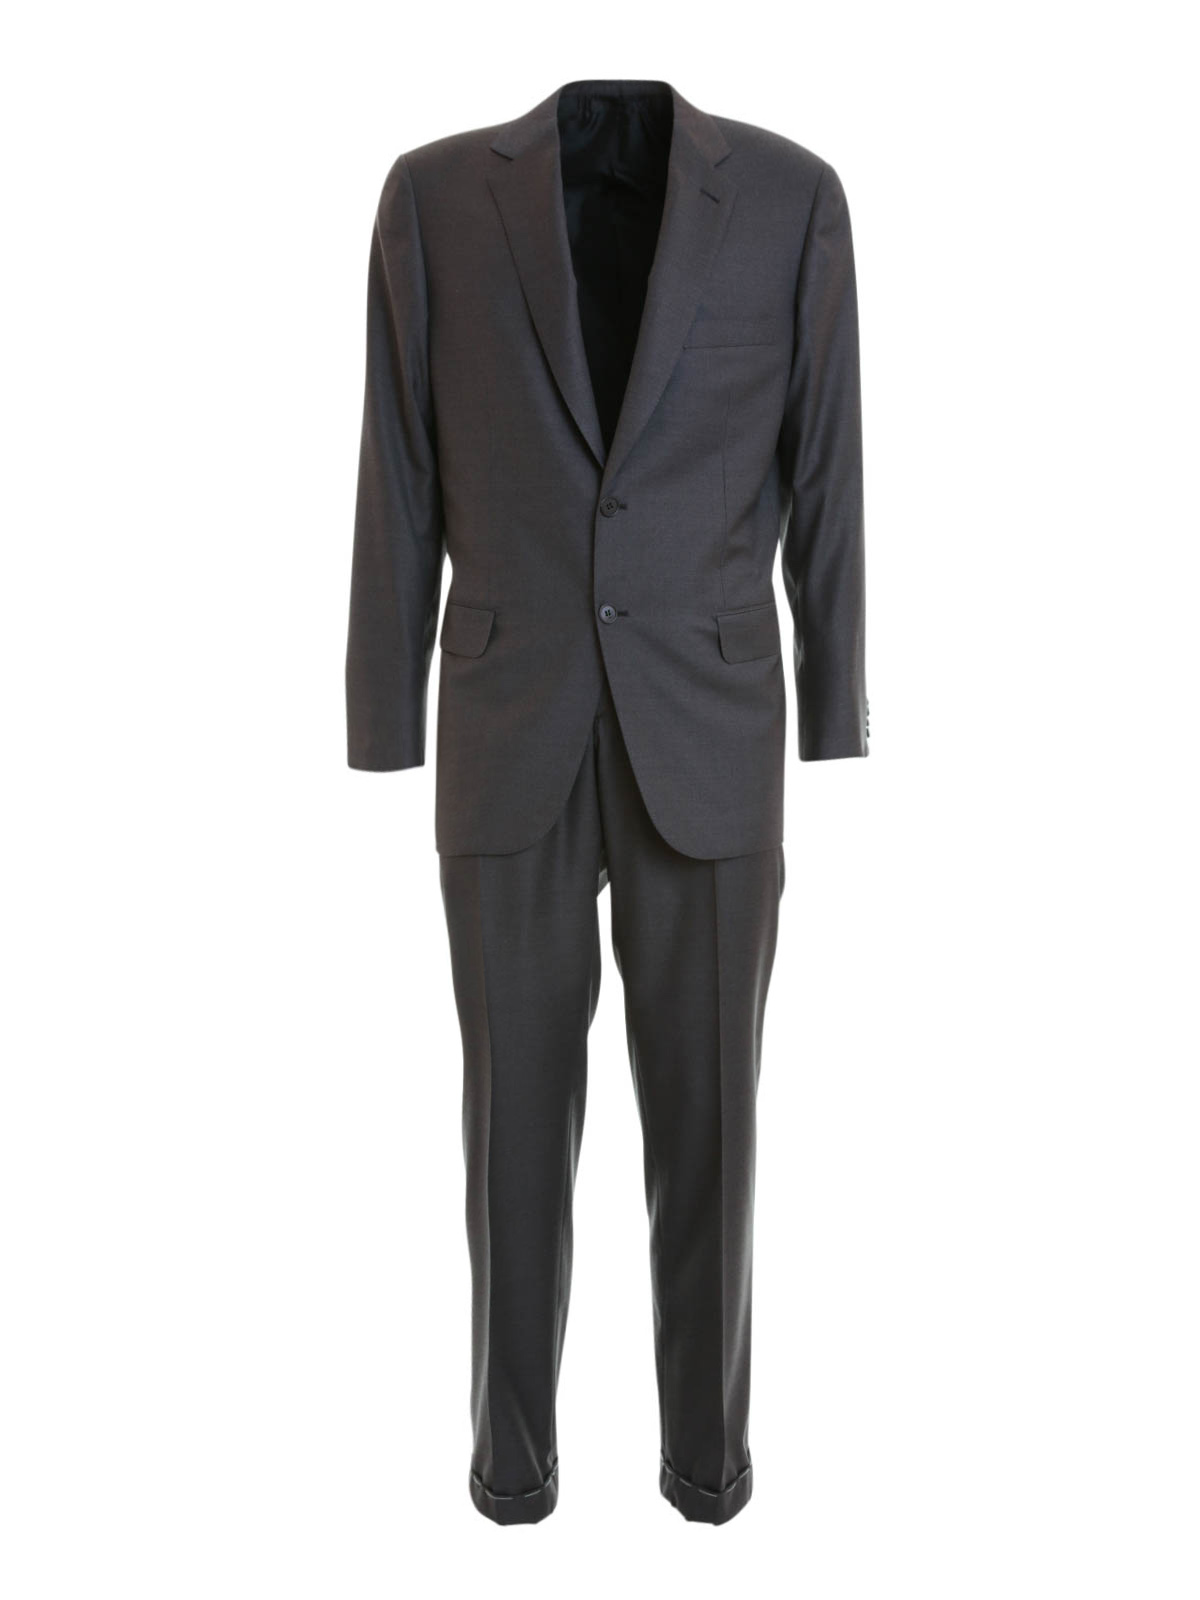 Brioni Light Grey Nomentano Prince of Wales Suit